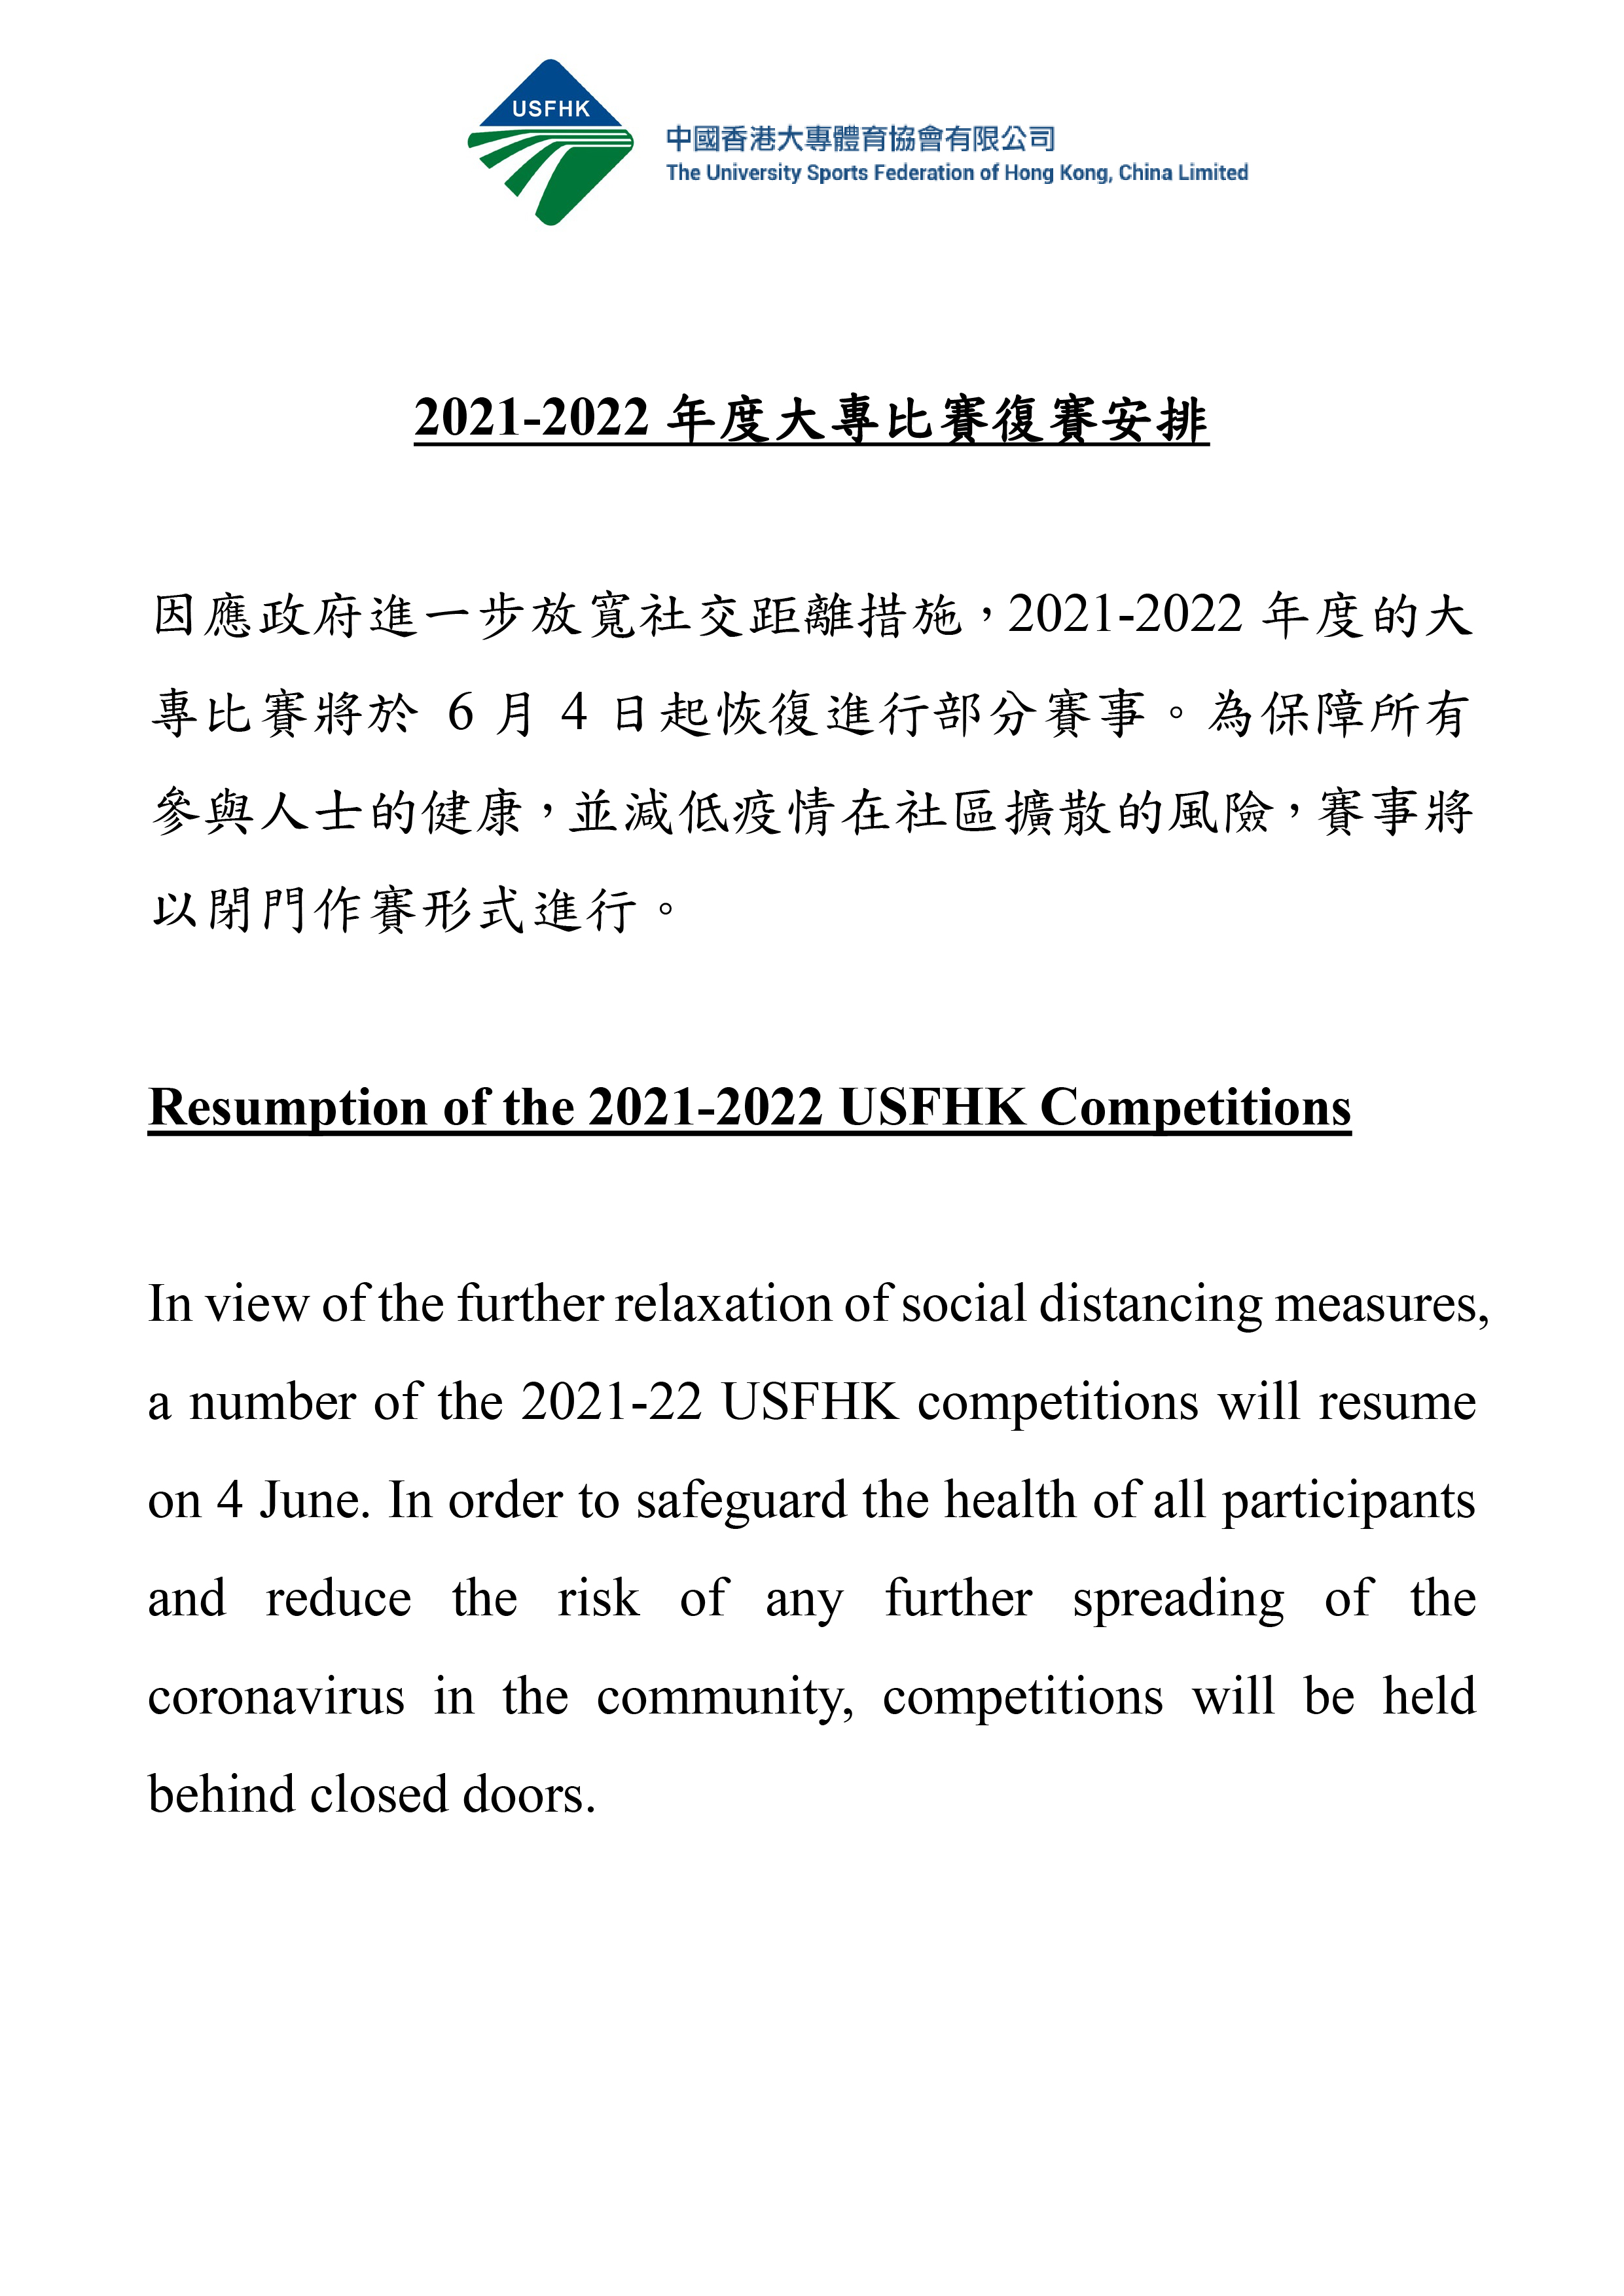 Resumption of the 2021-2022 USFHK Competitions